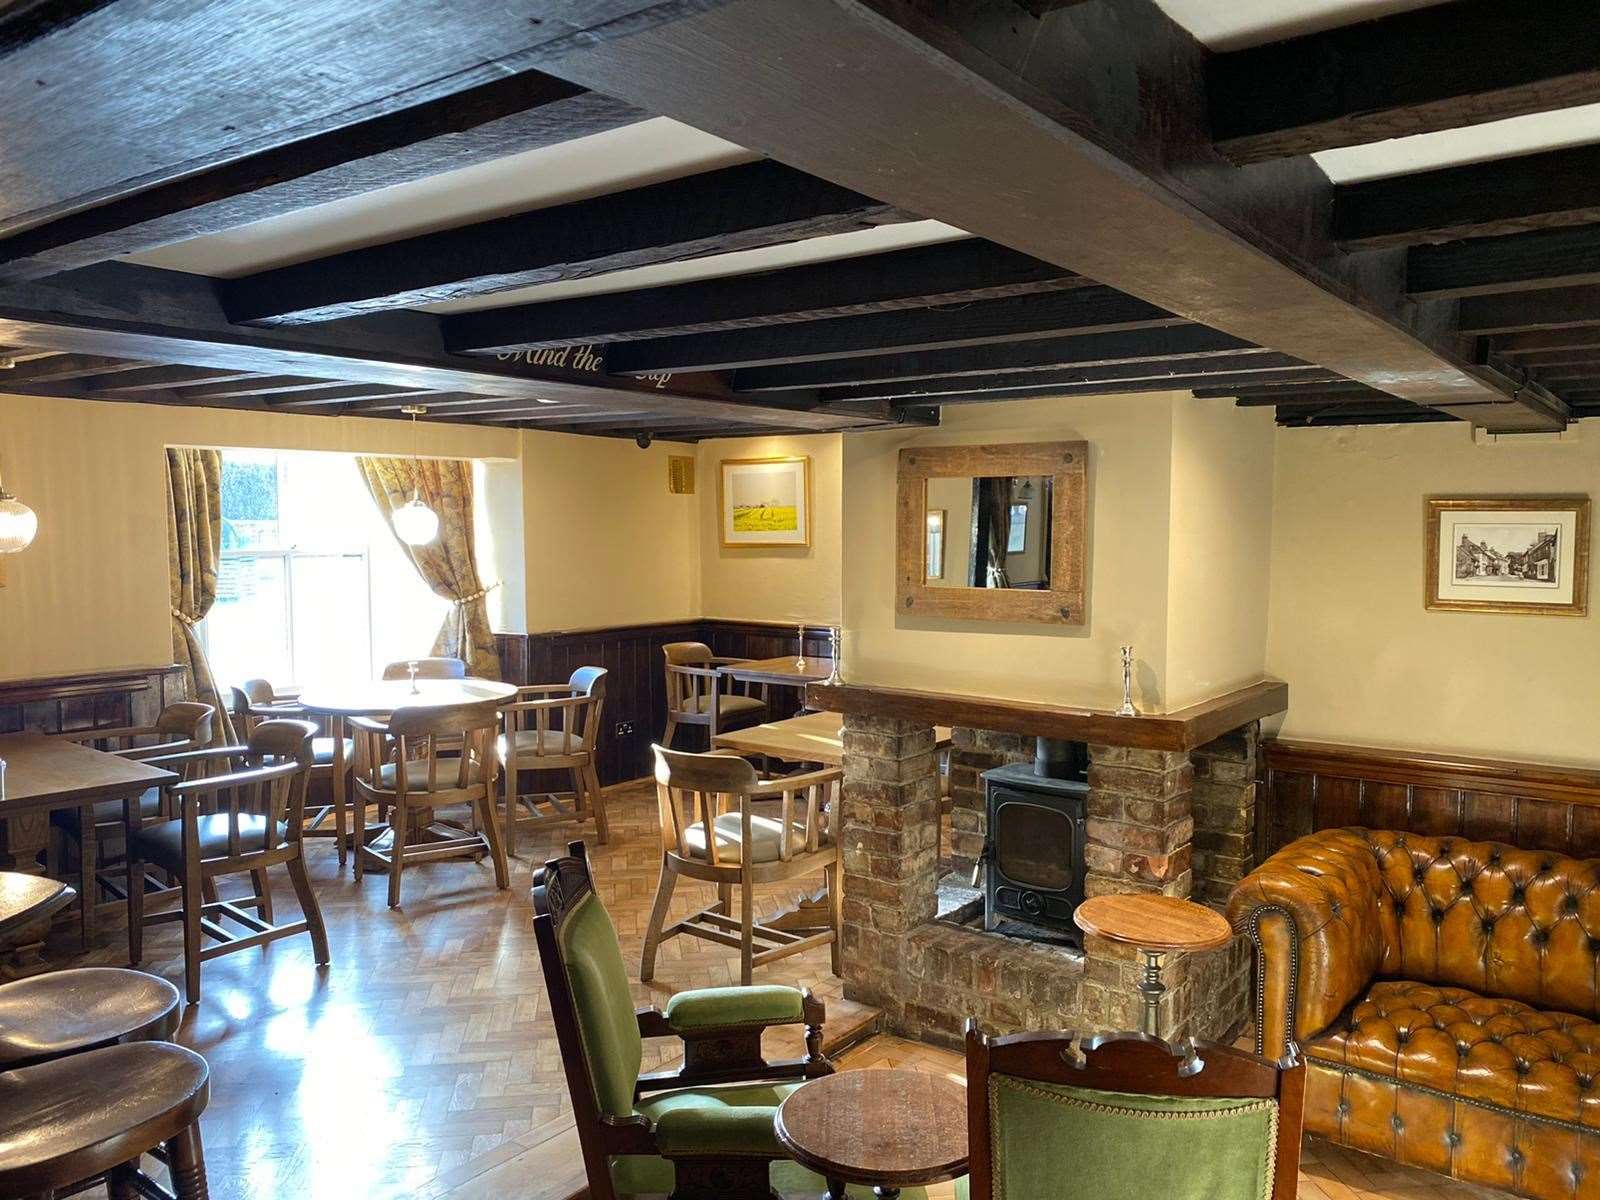 The pub now boasts all new furniture